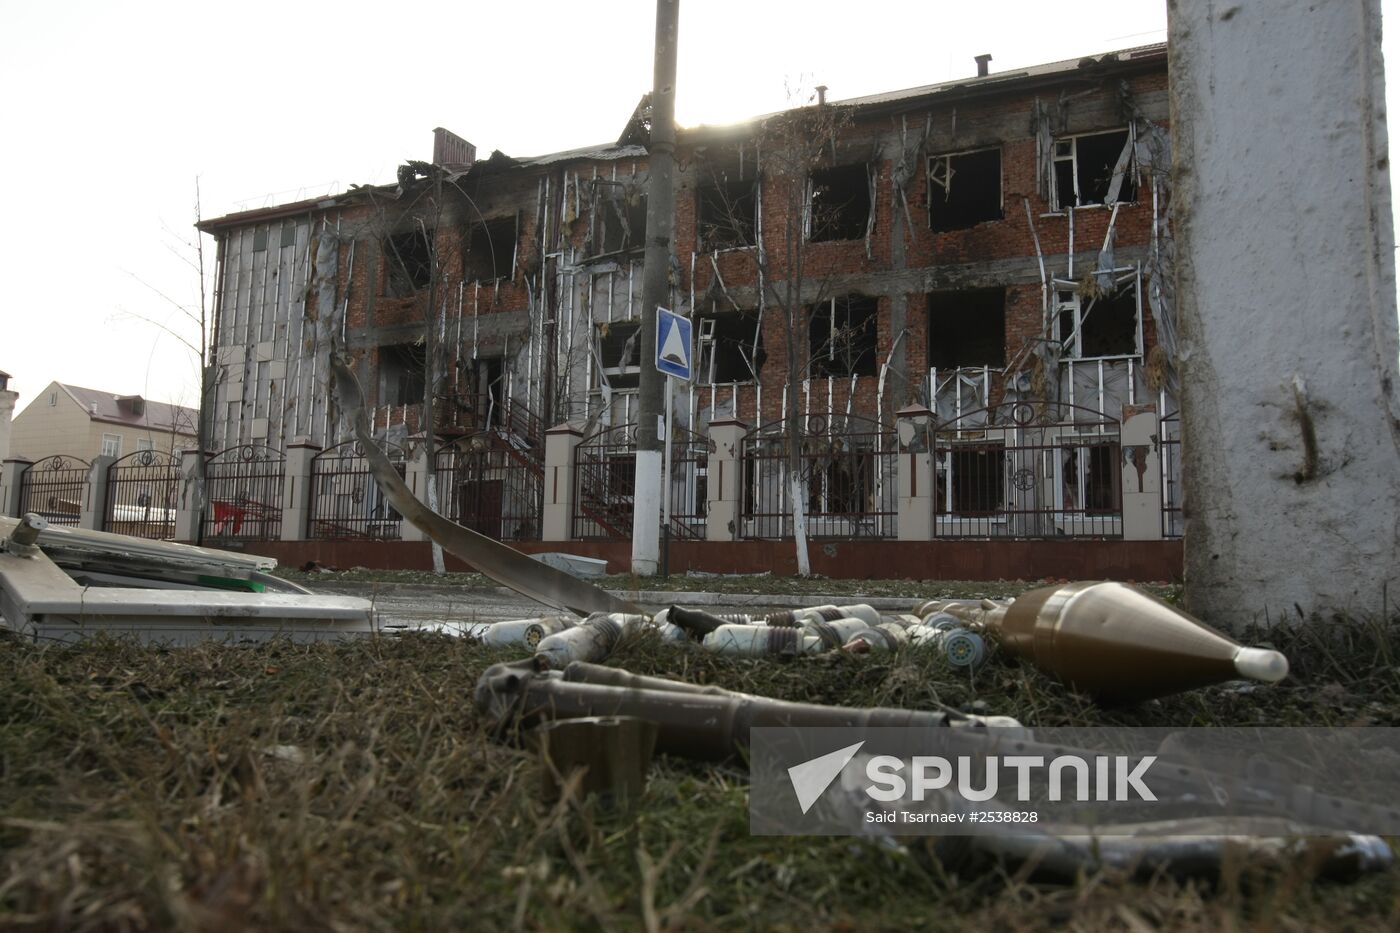 Aftermath of terror attack in Grozny liquidated